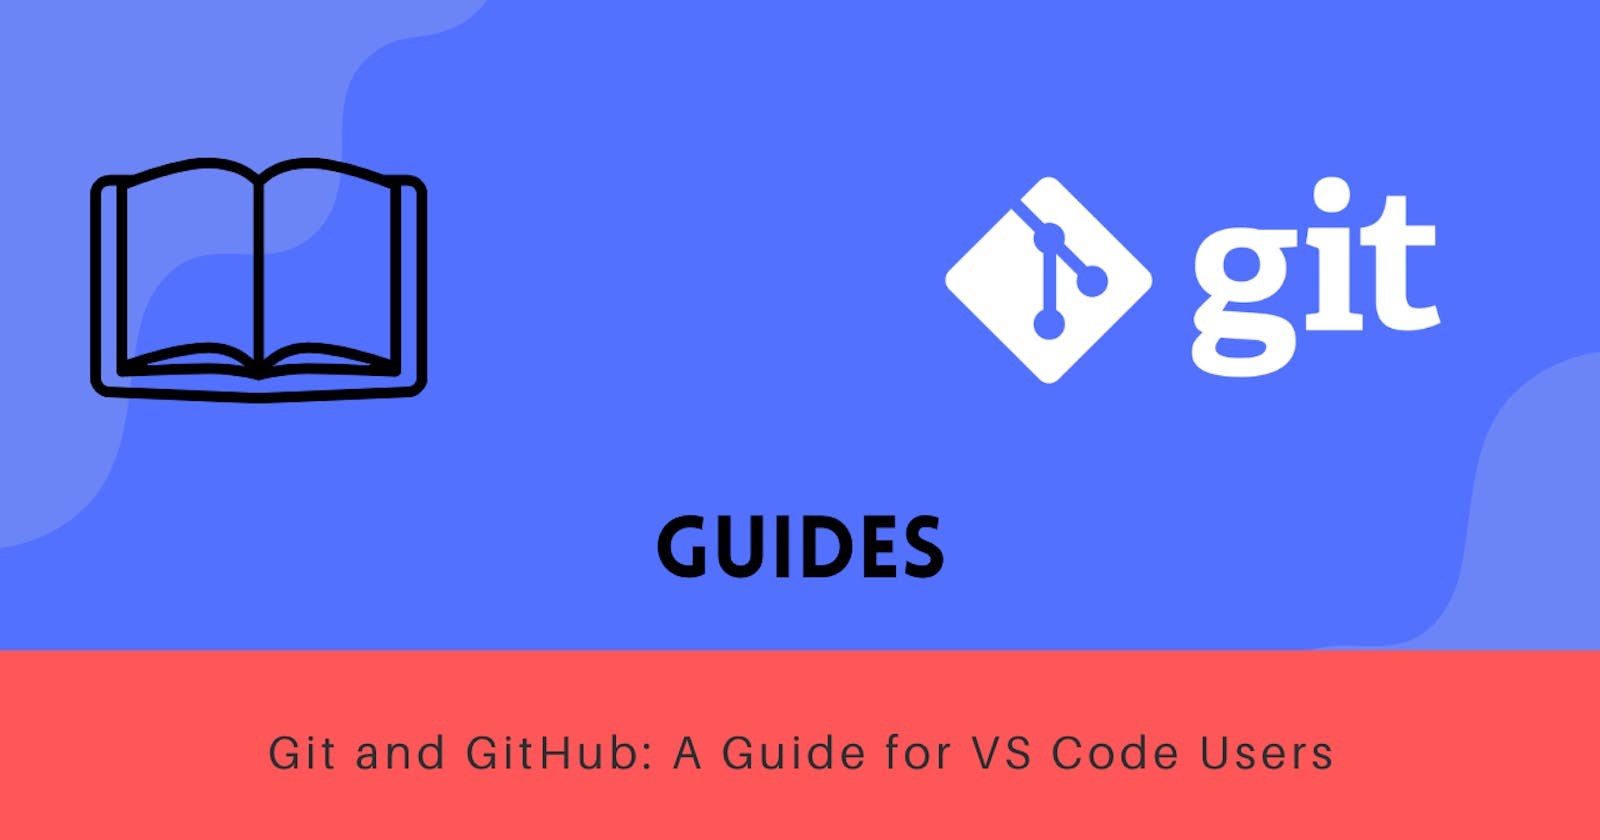 Git and GitHub: A Guide for VS Code Users